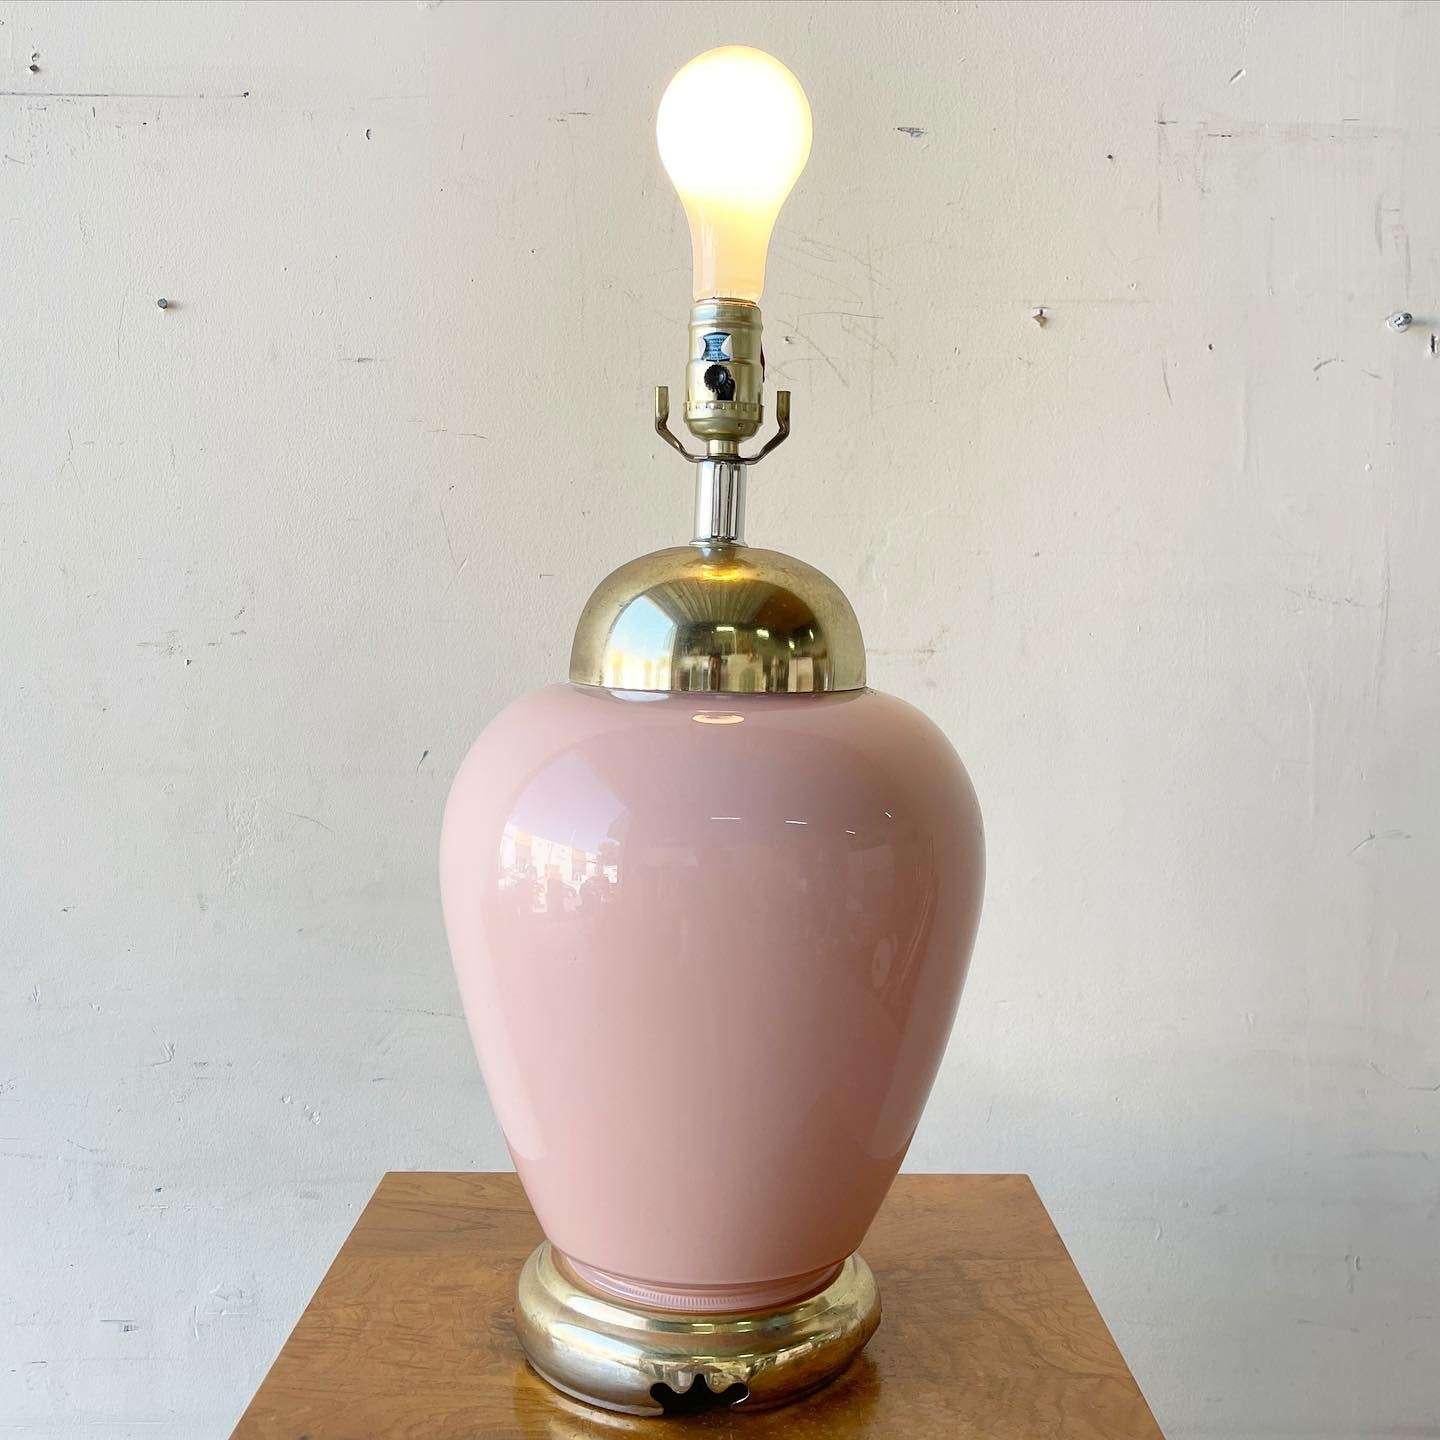 Exceptional vintage postmodern table lamp. Features a pink glass body on a gold base.
